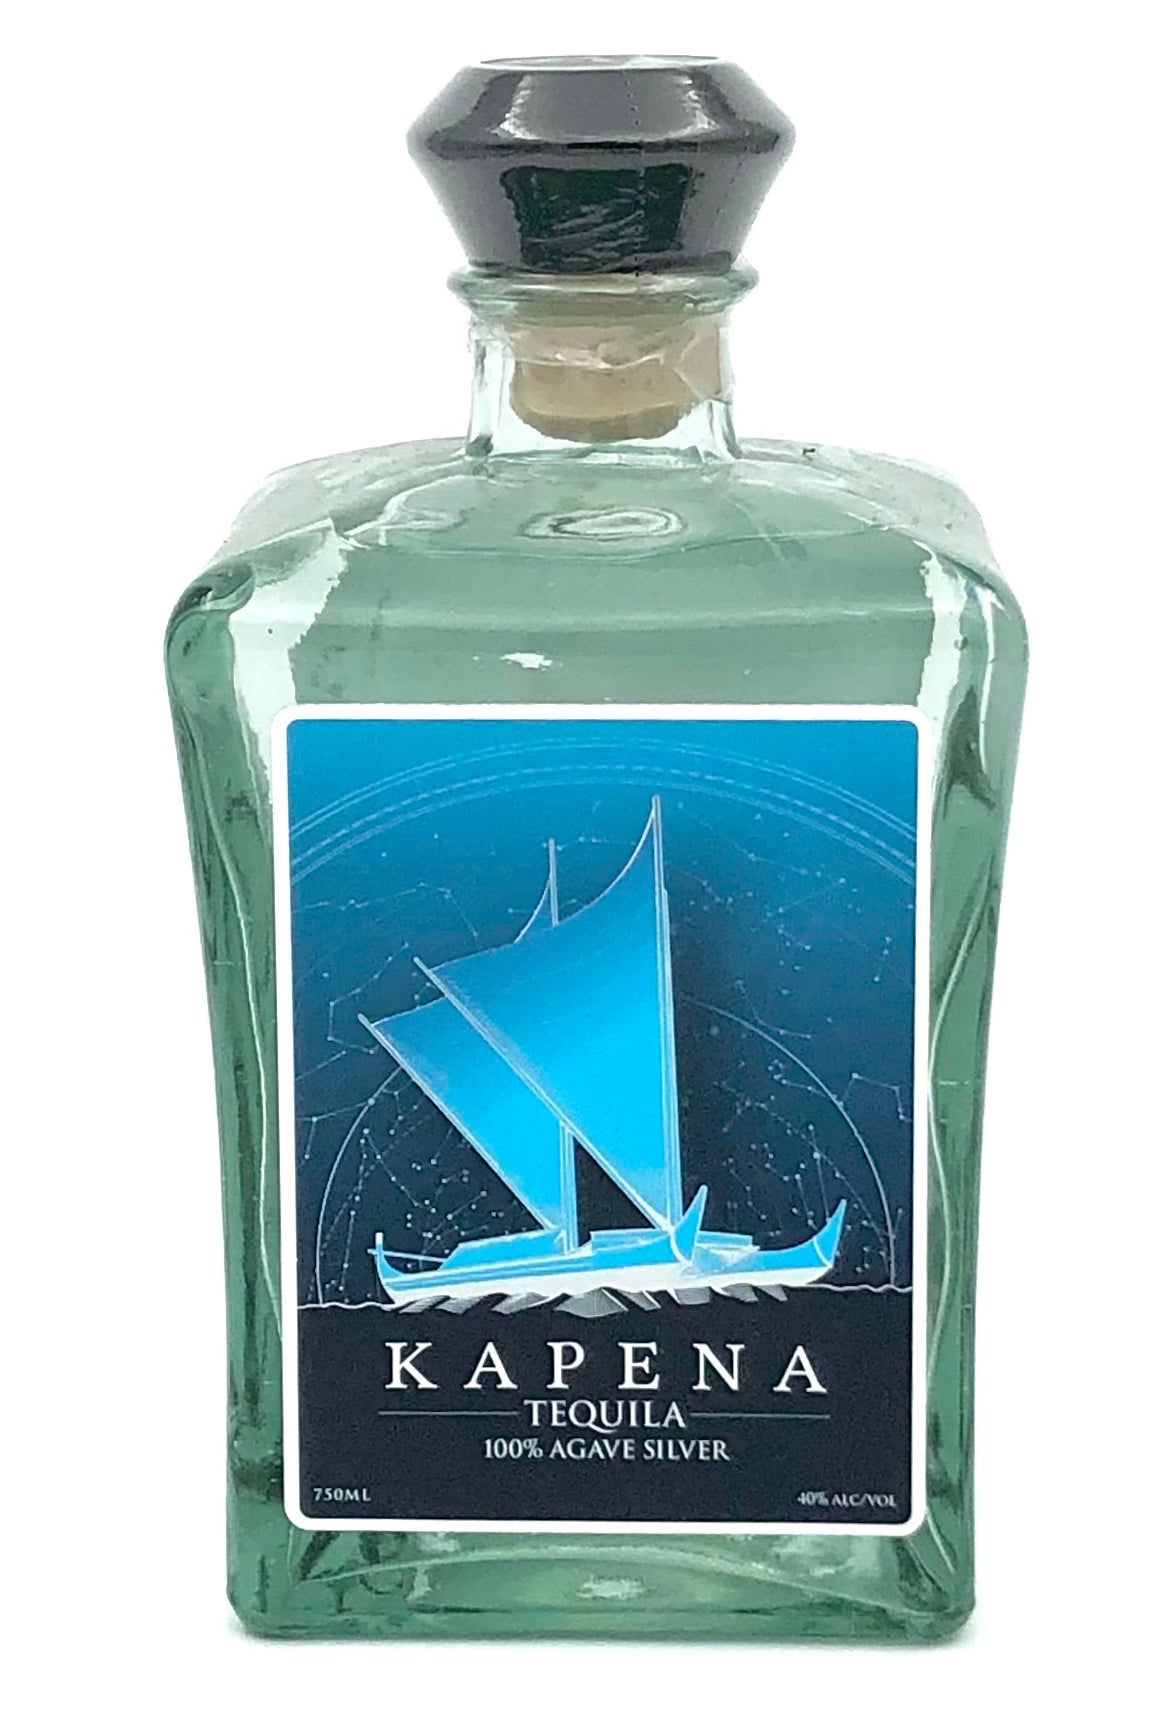 Kapena Silver Tequila